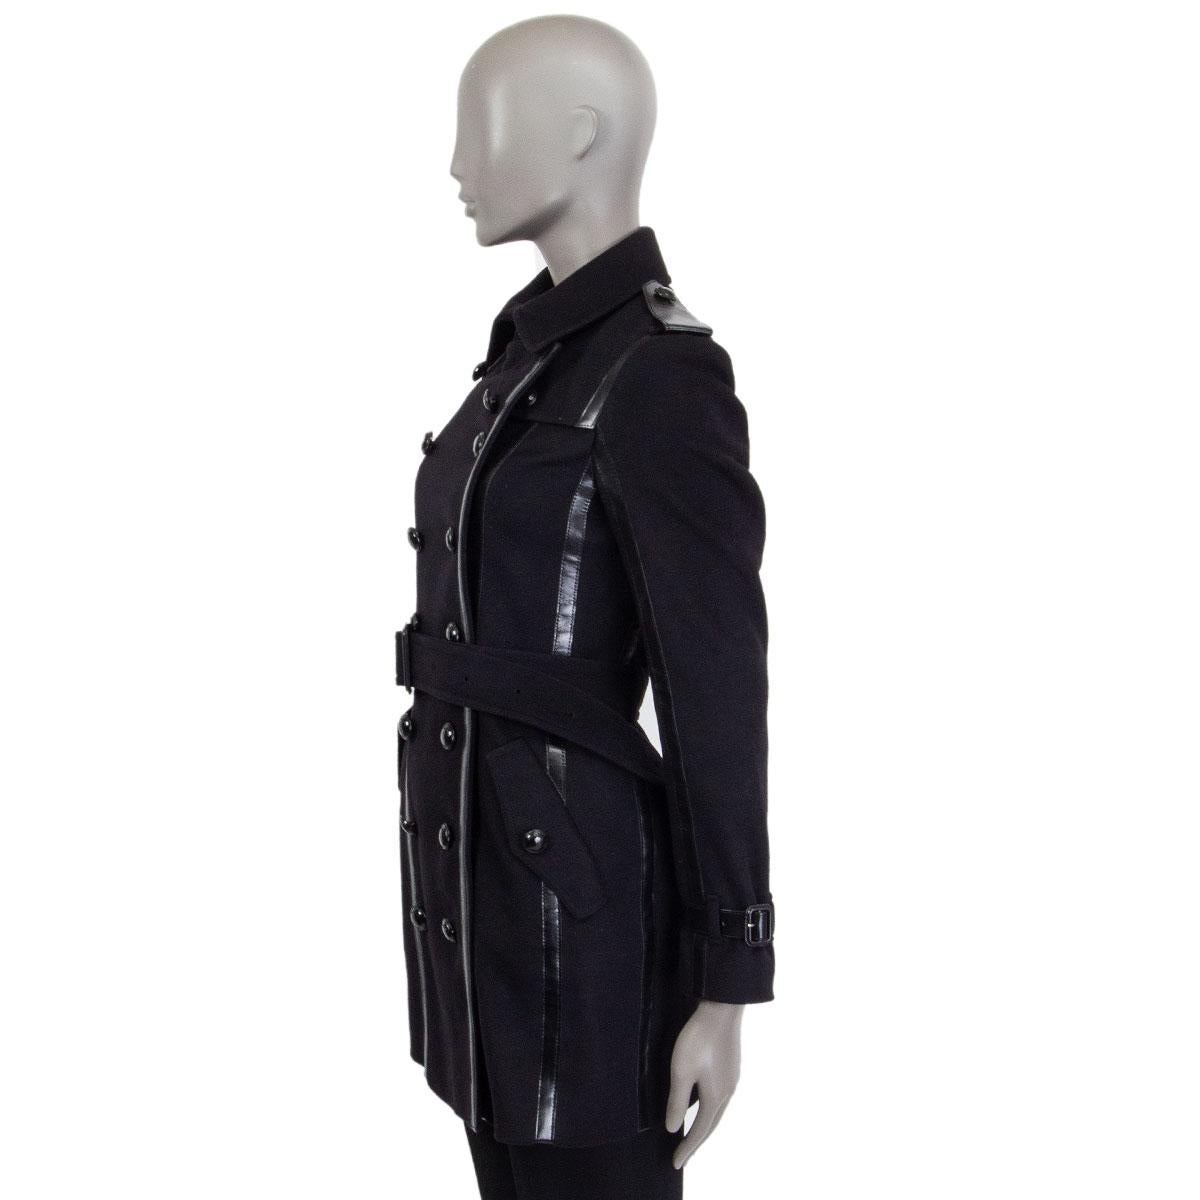 burberry double breasted jacket black